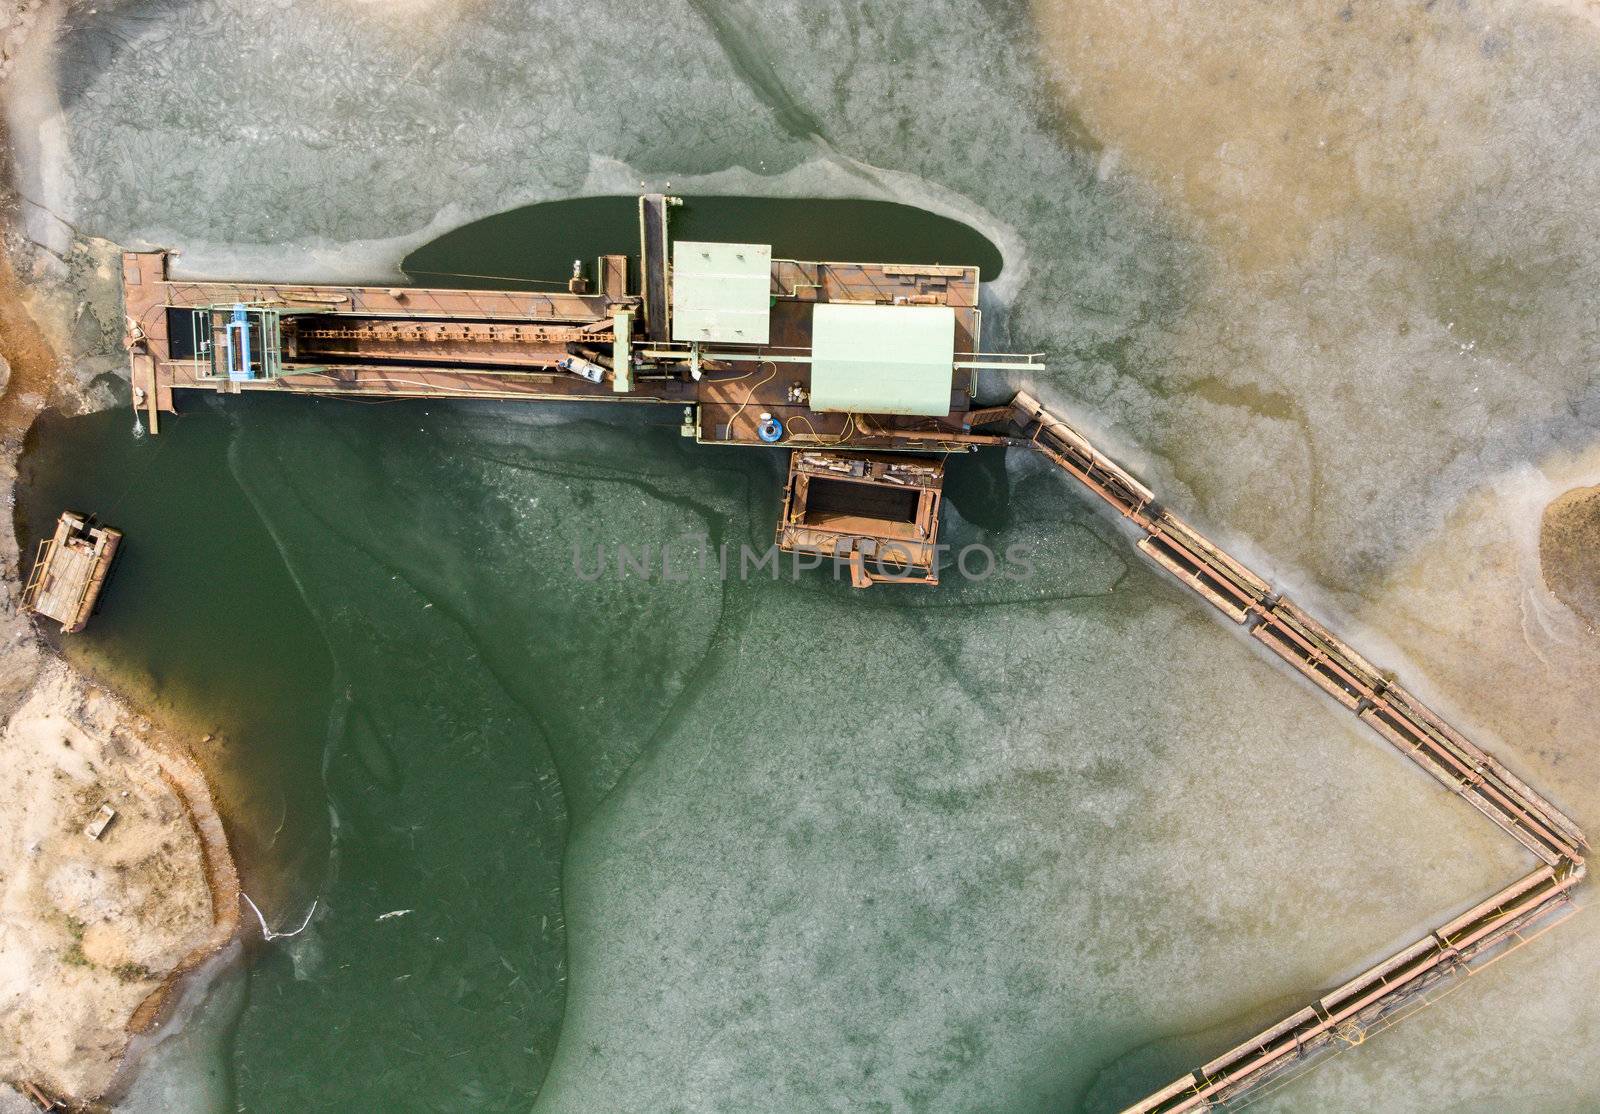 Vertical aerial photograph of the boom and suction dredger at the edge of the excavation area showing sand and the associated excavation pond, drone shot